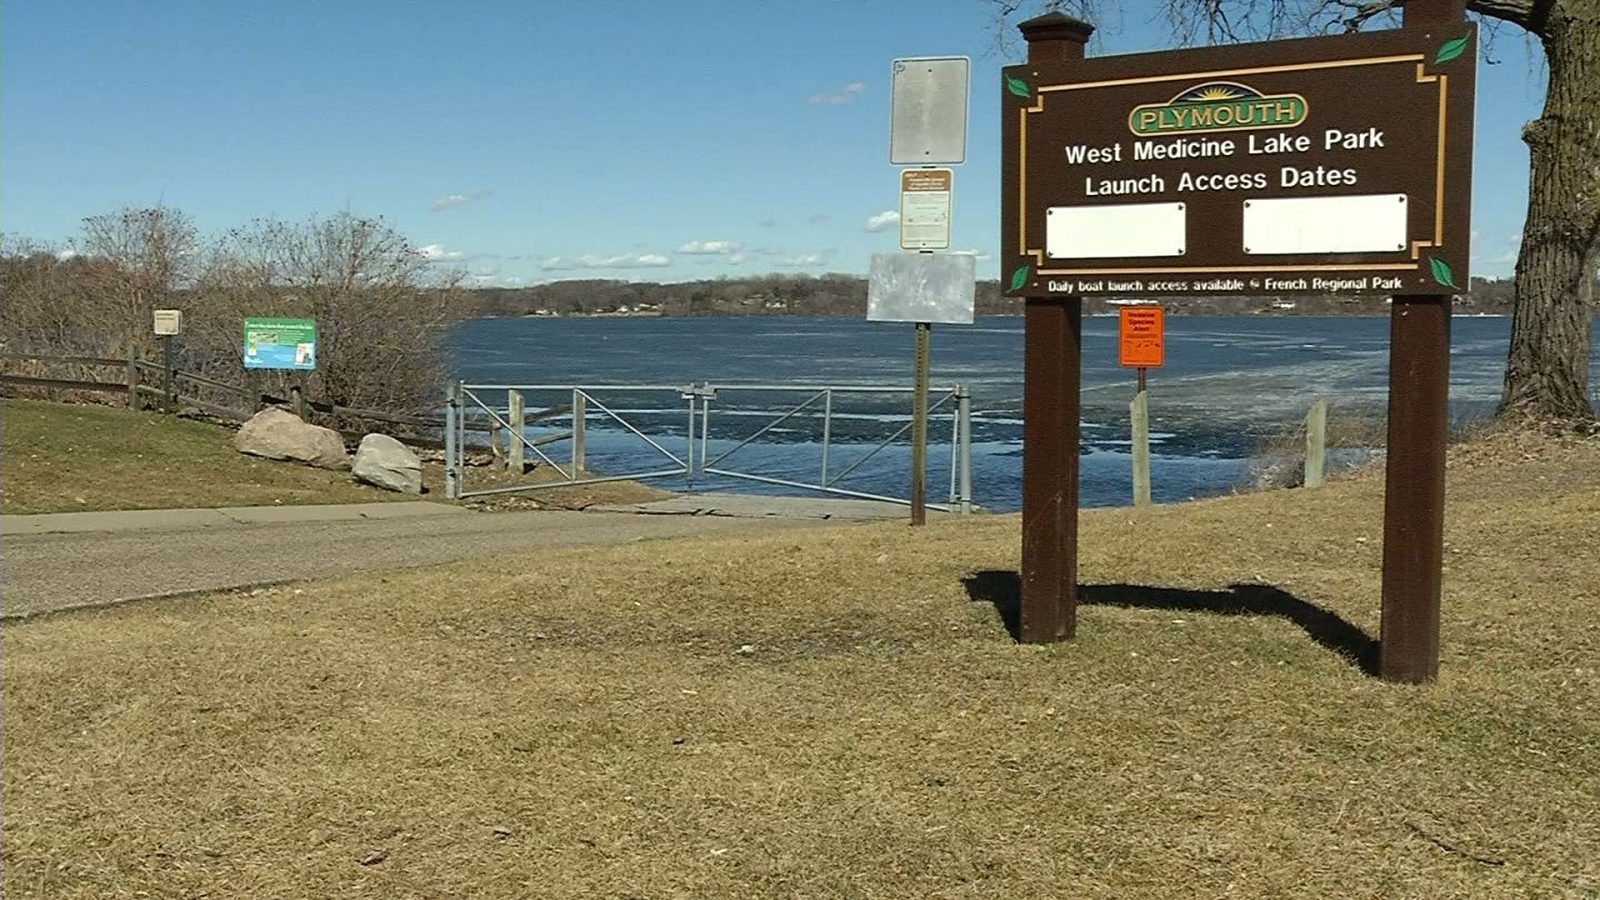 Plymouth to Close West Medicine Lake Boat Ramp - CCX Media